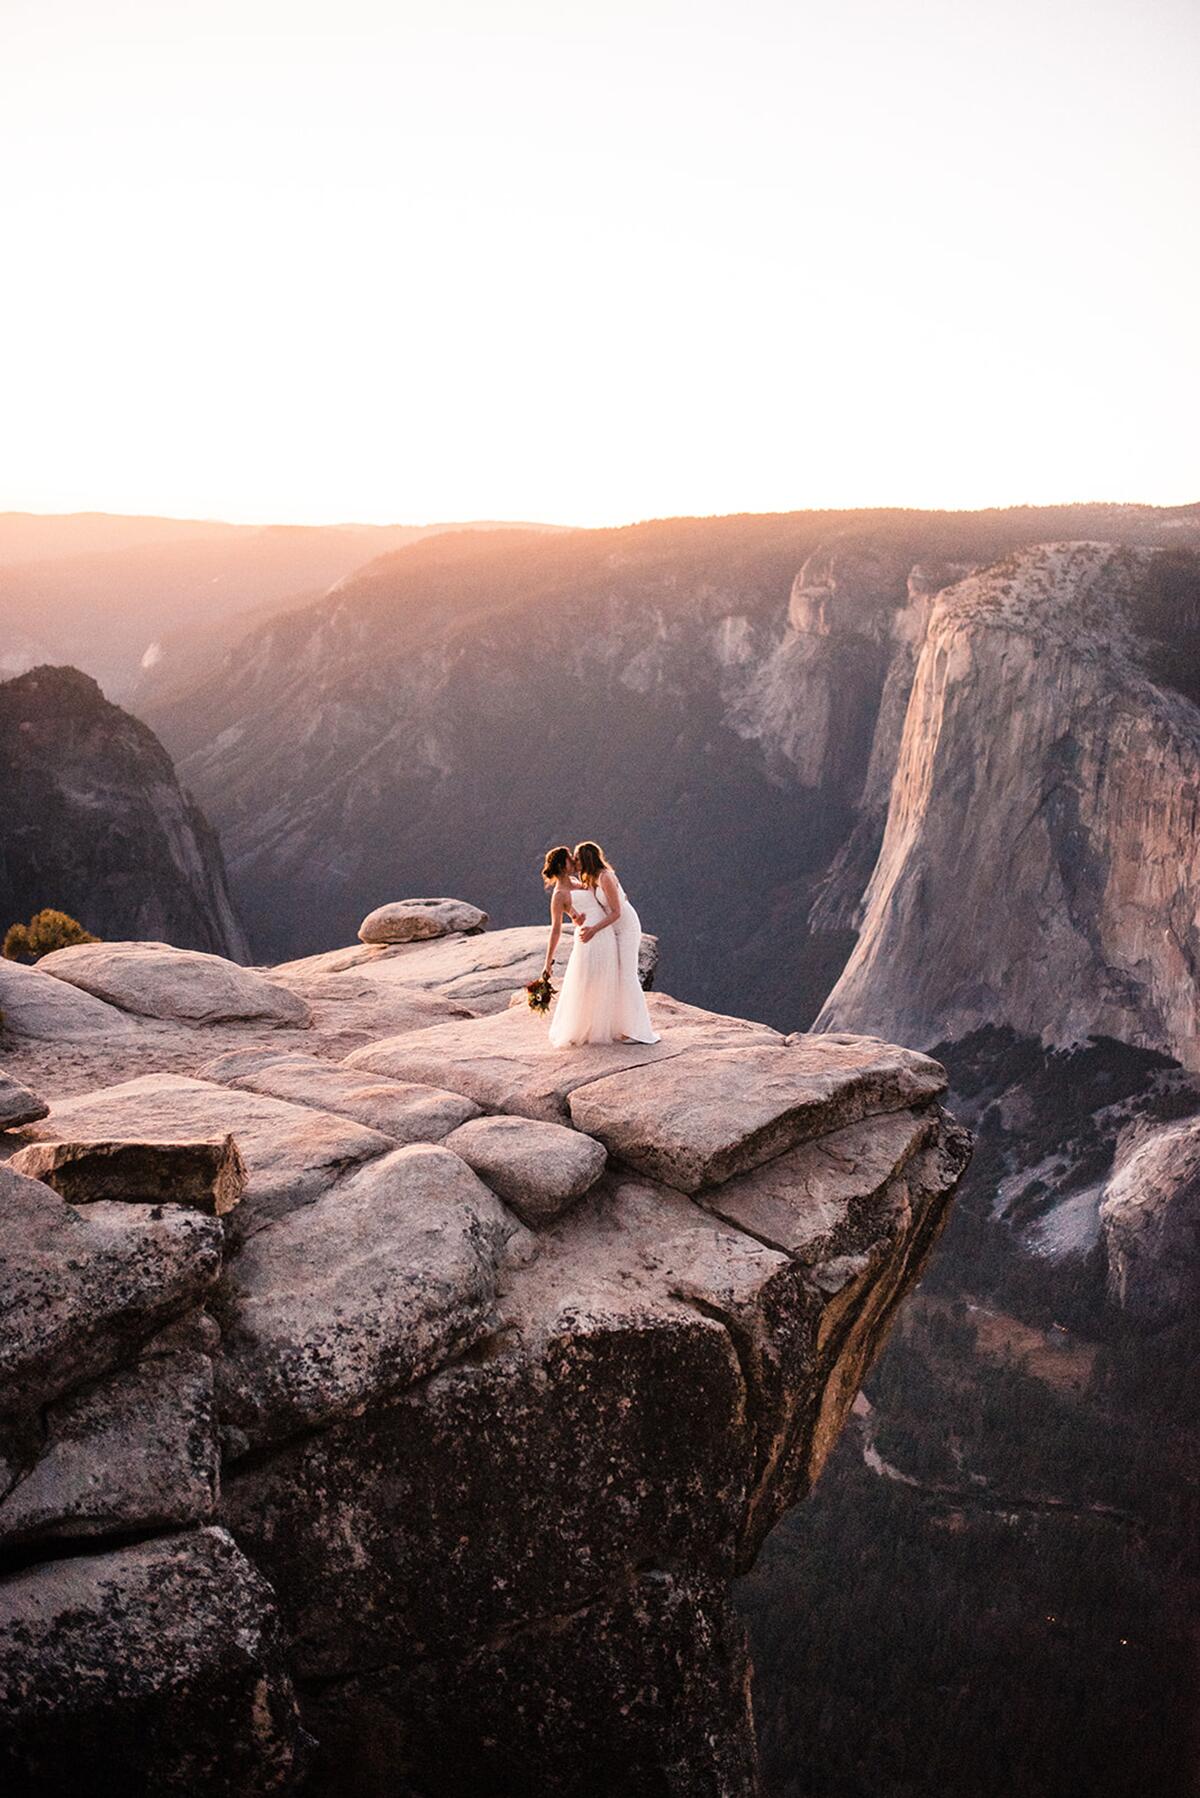 07_AdventurePhotoEssay__TracyandHannah_7.) Hannah_Tracy_Yosemite_Elopement_The_Foxes_Photography_310_websize